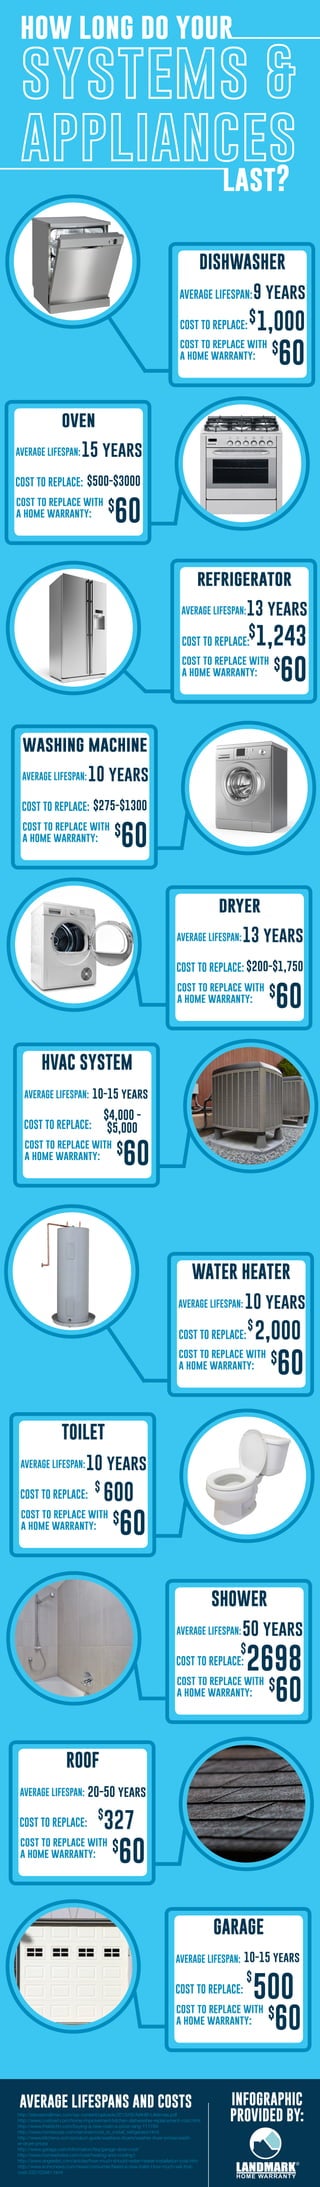 how long do your
systems &
appliances
last?
DISHWASHER
AVERAGE LIFESPAN:
COST TO REPLACE:
cost to replace with
a home warranty:
9 years
oven
AVERAGE LIFESPAN:
COST TO REPLACE:
cost to replace with
a home warranty:
15 years
$500-$3000
refrigerator
AVERAGE LIFESPAN:
COST TO REPLACE:
cost to replace with
a home warranty:
13 years
1,243$
washing machine
AVERAGE LIFESPAN:
COST TO REPLACE:
cost to replace with
a home warranty:
10 years
$275-$1300
dryer
AVERAGE LIFESPAN:
COST TO REPLACE:
cost to replace with
a home warranty:
13 years
$200-$1,750
WATER HEATER
AVERAGE LIFESPAN:
COST TO REPLACE:
cost to replace with
a home warranty:
10 years
HVAC SYSTEM
AVERAGE LIFESPAN:
COST TO REPLACE:
cost to replace with
a home warranty:
10-15 years
$4,000 -
$5,000
2,000$
TOILET
AVERAGE LIFESPAN:
COST TO REPLACE:
cost to replace with
a home warranty:
10 years
600$
SHOWER
AVERAGE LIFESPAN:
COST TO REPLACE:
cost to replace with
a home warranty:
50 years
2698
$
ROOF
AVERAGE LIFESPAN:
COST TO REPLACE:
cost to replace with
a home warranty:
20-50 years
327$
GARAGE
AVERAGE LIFESPAN:
COST TO REPLACE:
cost to replace with
a home warranty:
500
$
10-15 years
AVERAGE LIFESPANS AND COSTS INFOGRAPHIC
PROVIDED BY:http://stevesmallman.com/wp-content/uploads/2013/05/NAHB-Lifetimes.pdf
http://www.costowl.com/home-improvement/kitchen-dishwasher-replacement-cost.html
http://www.thekitchn.com/buying-a-new-oven-a-price-rang-111784
http://www.homewyse.com/services/cost_to_install_refrigerator.html
http://www.kitchens.com/product-guide/washers-dryers/washer-dryer-prices/wash-
er-dryer-prices
http://www.garaga.com/information/faq/garage-door-cost/
http://www.homeadvisor.com/cost/heating-and-cooling/)
http://www.angieslist.com/articles/how-much-should-water-heater-installation-cost.htm
http://www.komonews.com/news/consumer/Need-a-new-toilet-How-much-will-that-
cost-232103481.html
 